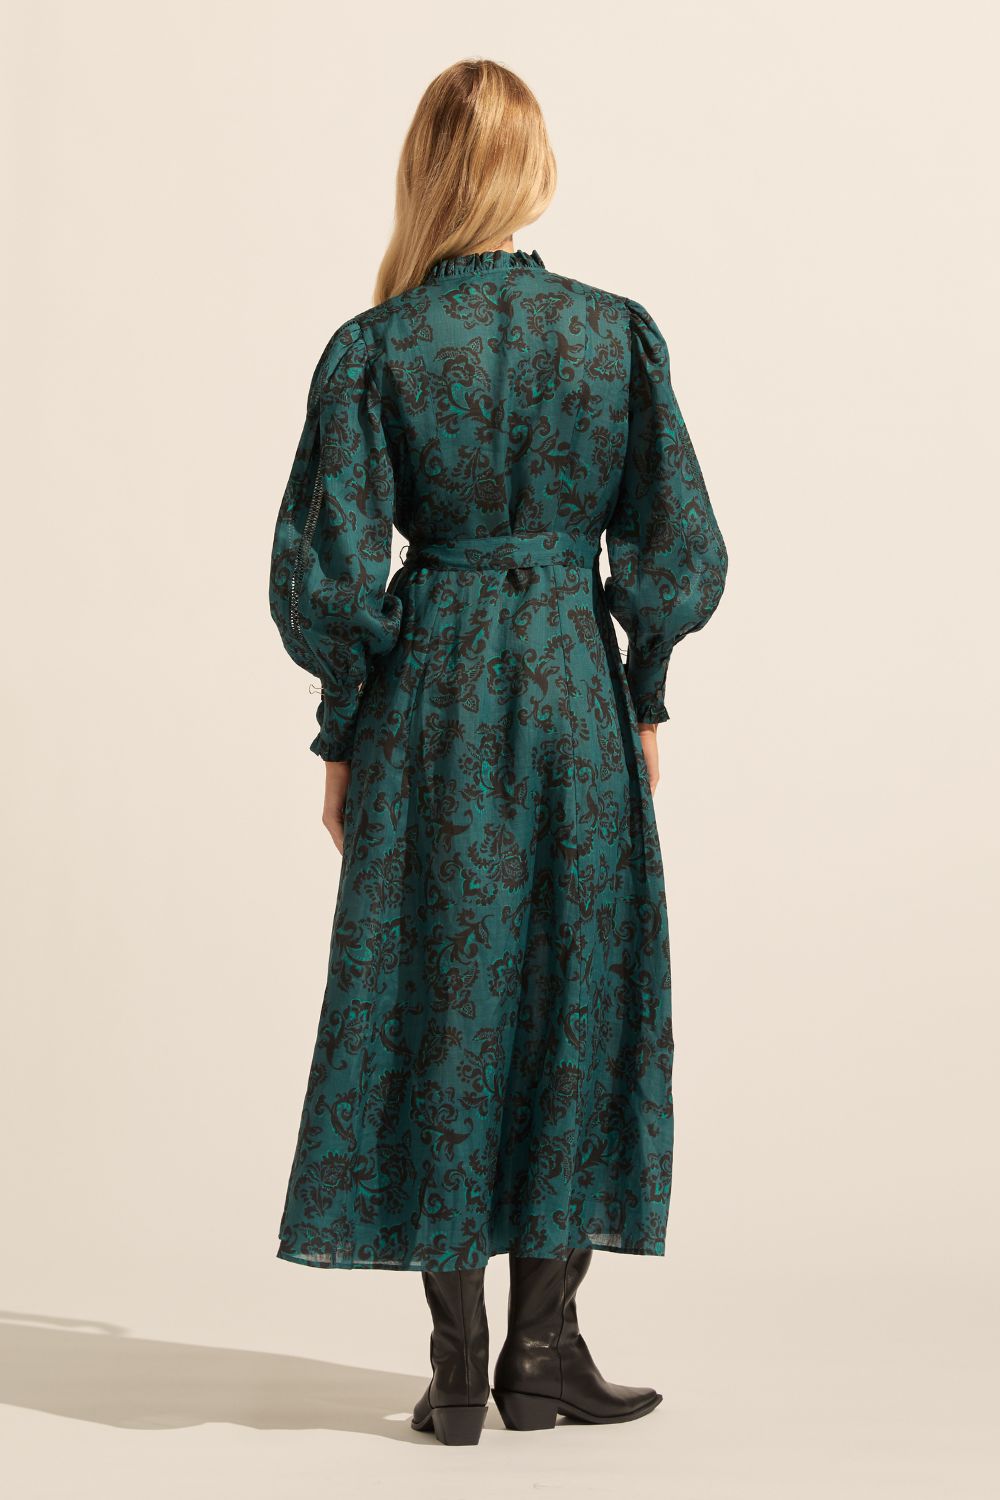 melody dress - green floral